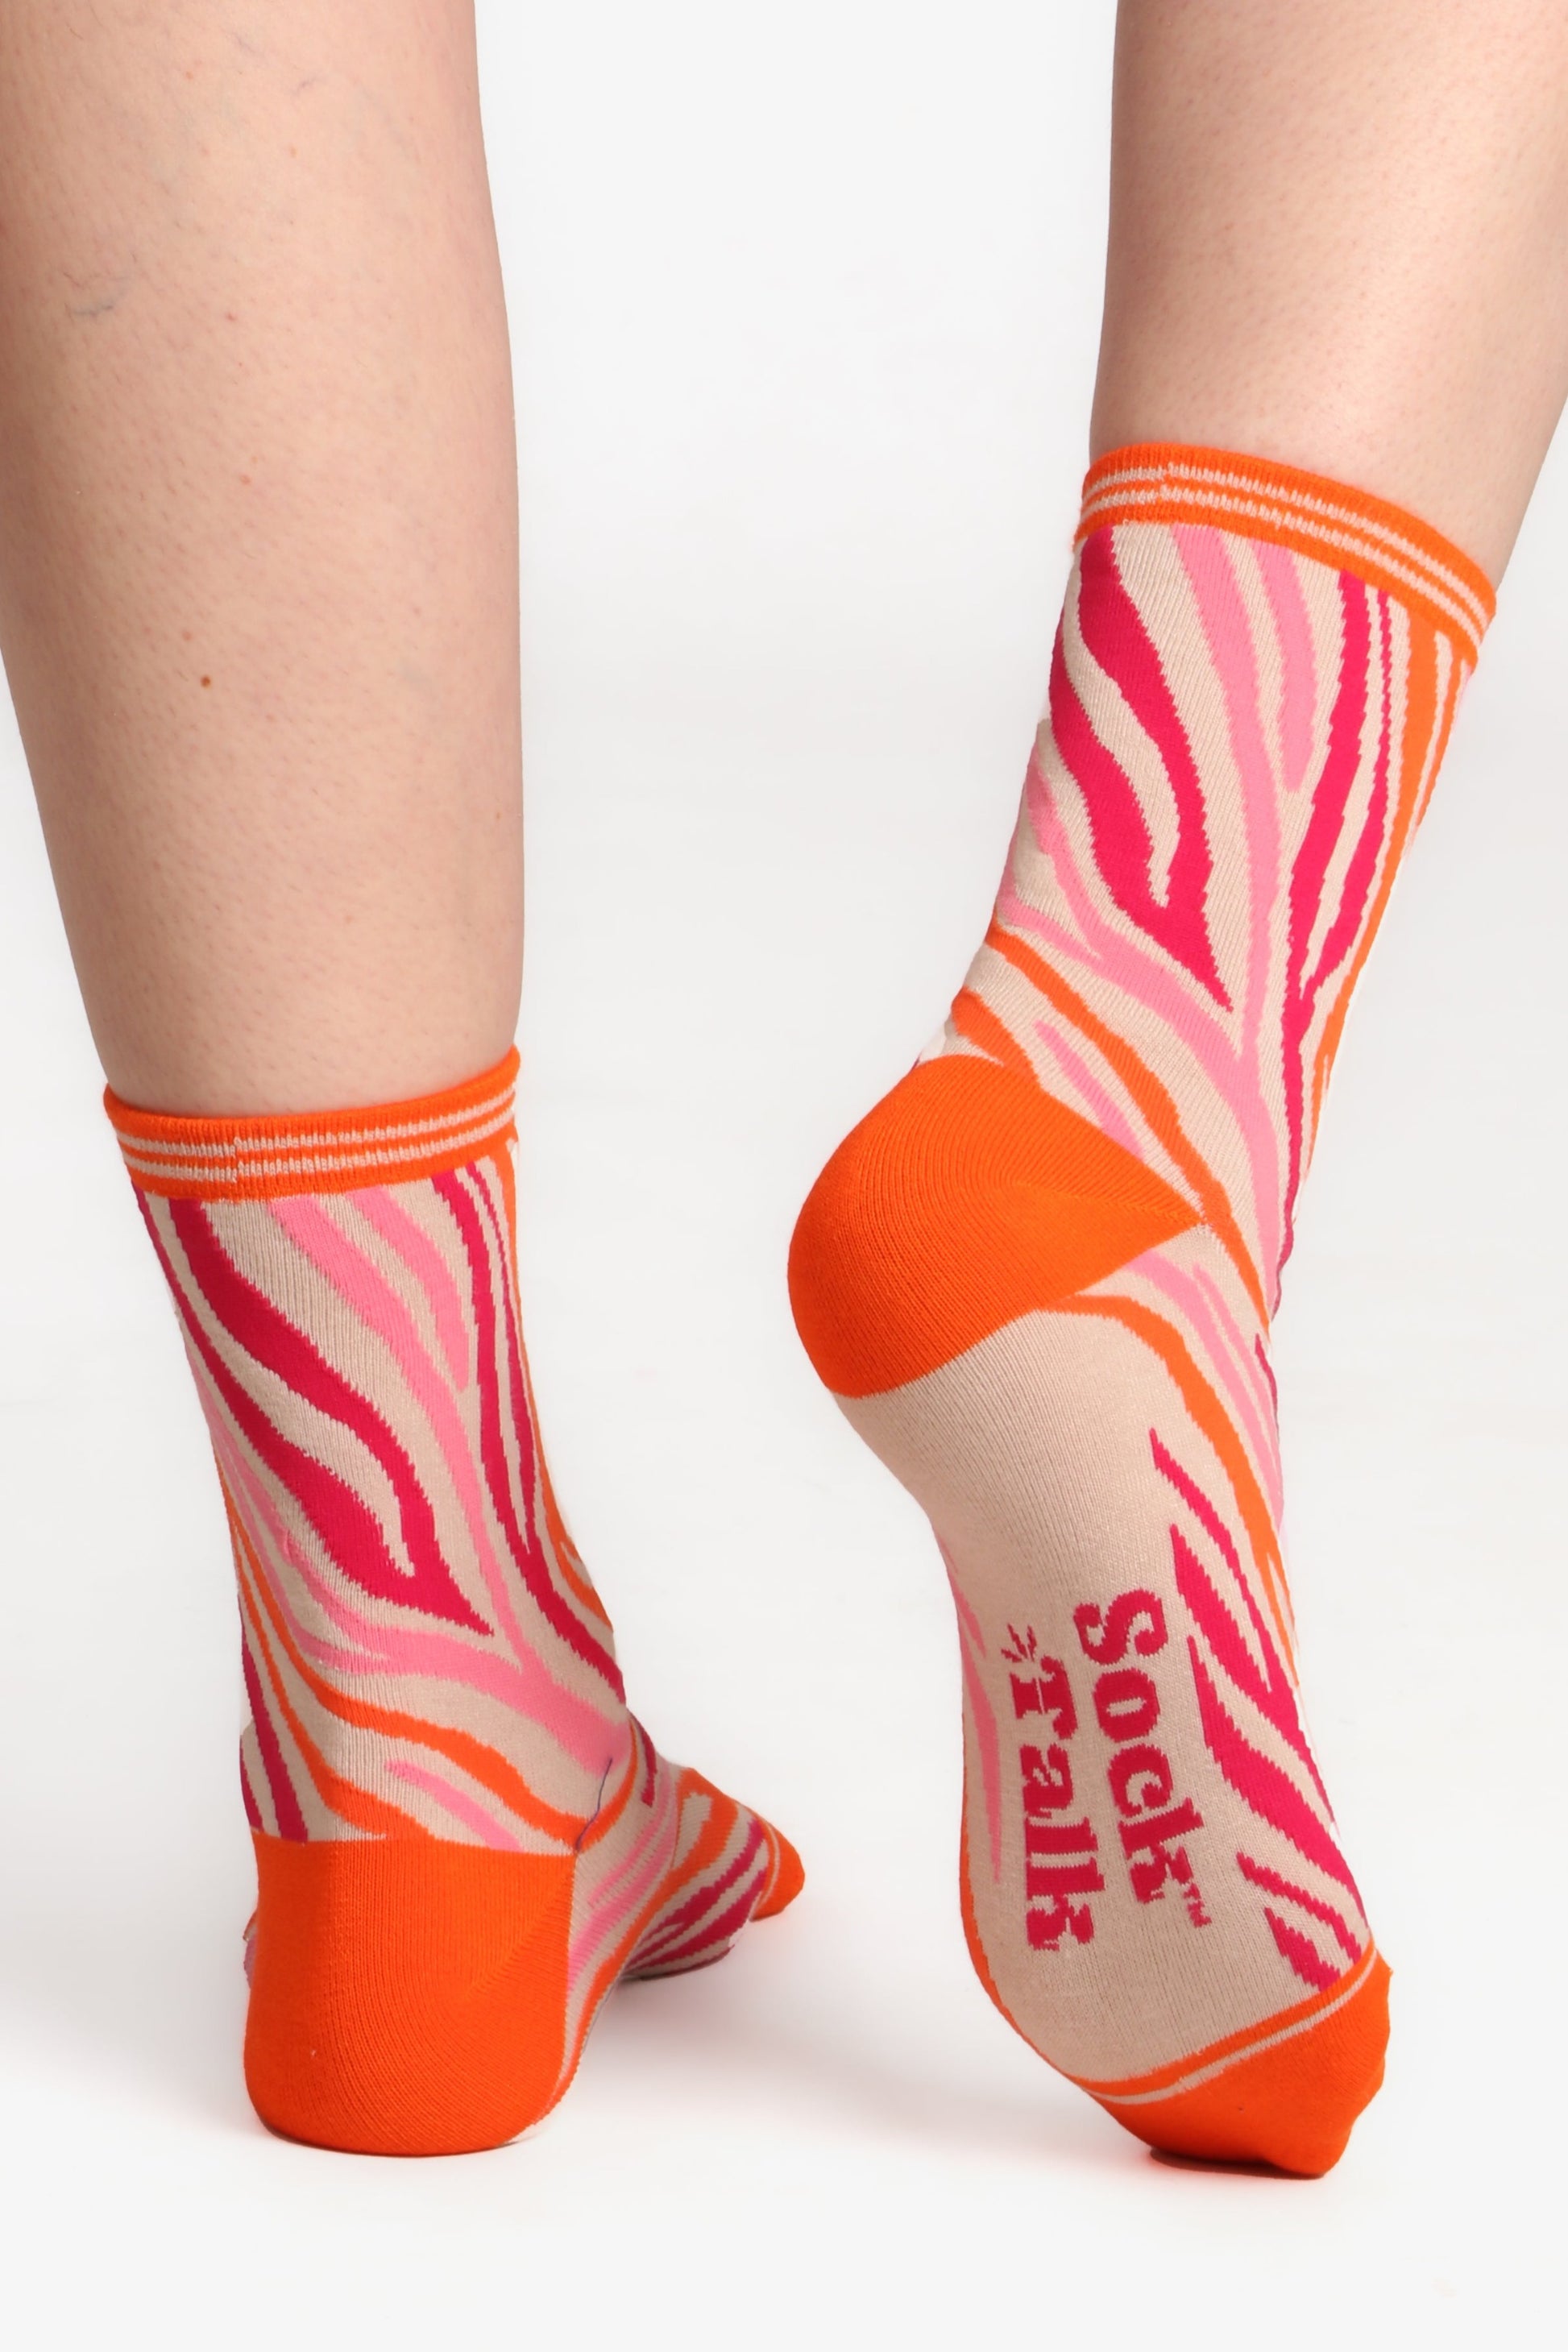 Model wearing bamboo zebra print socks. Posed with feet facing away from camera to show sole of sock which has sock talk logo 